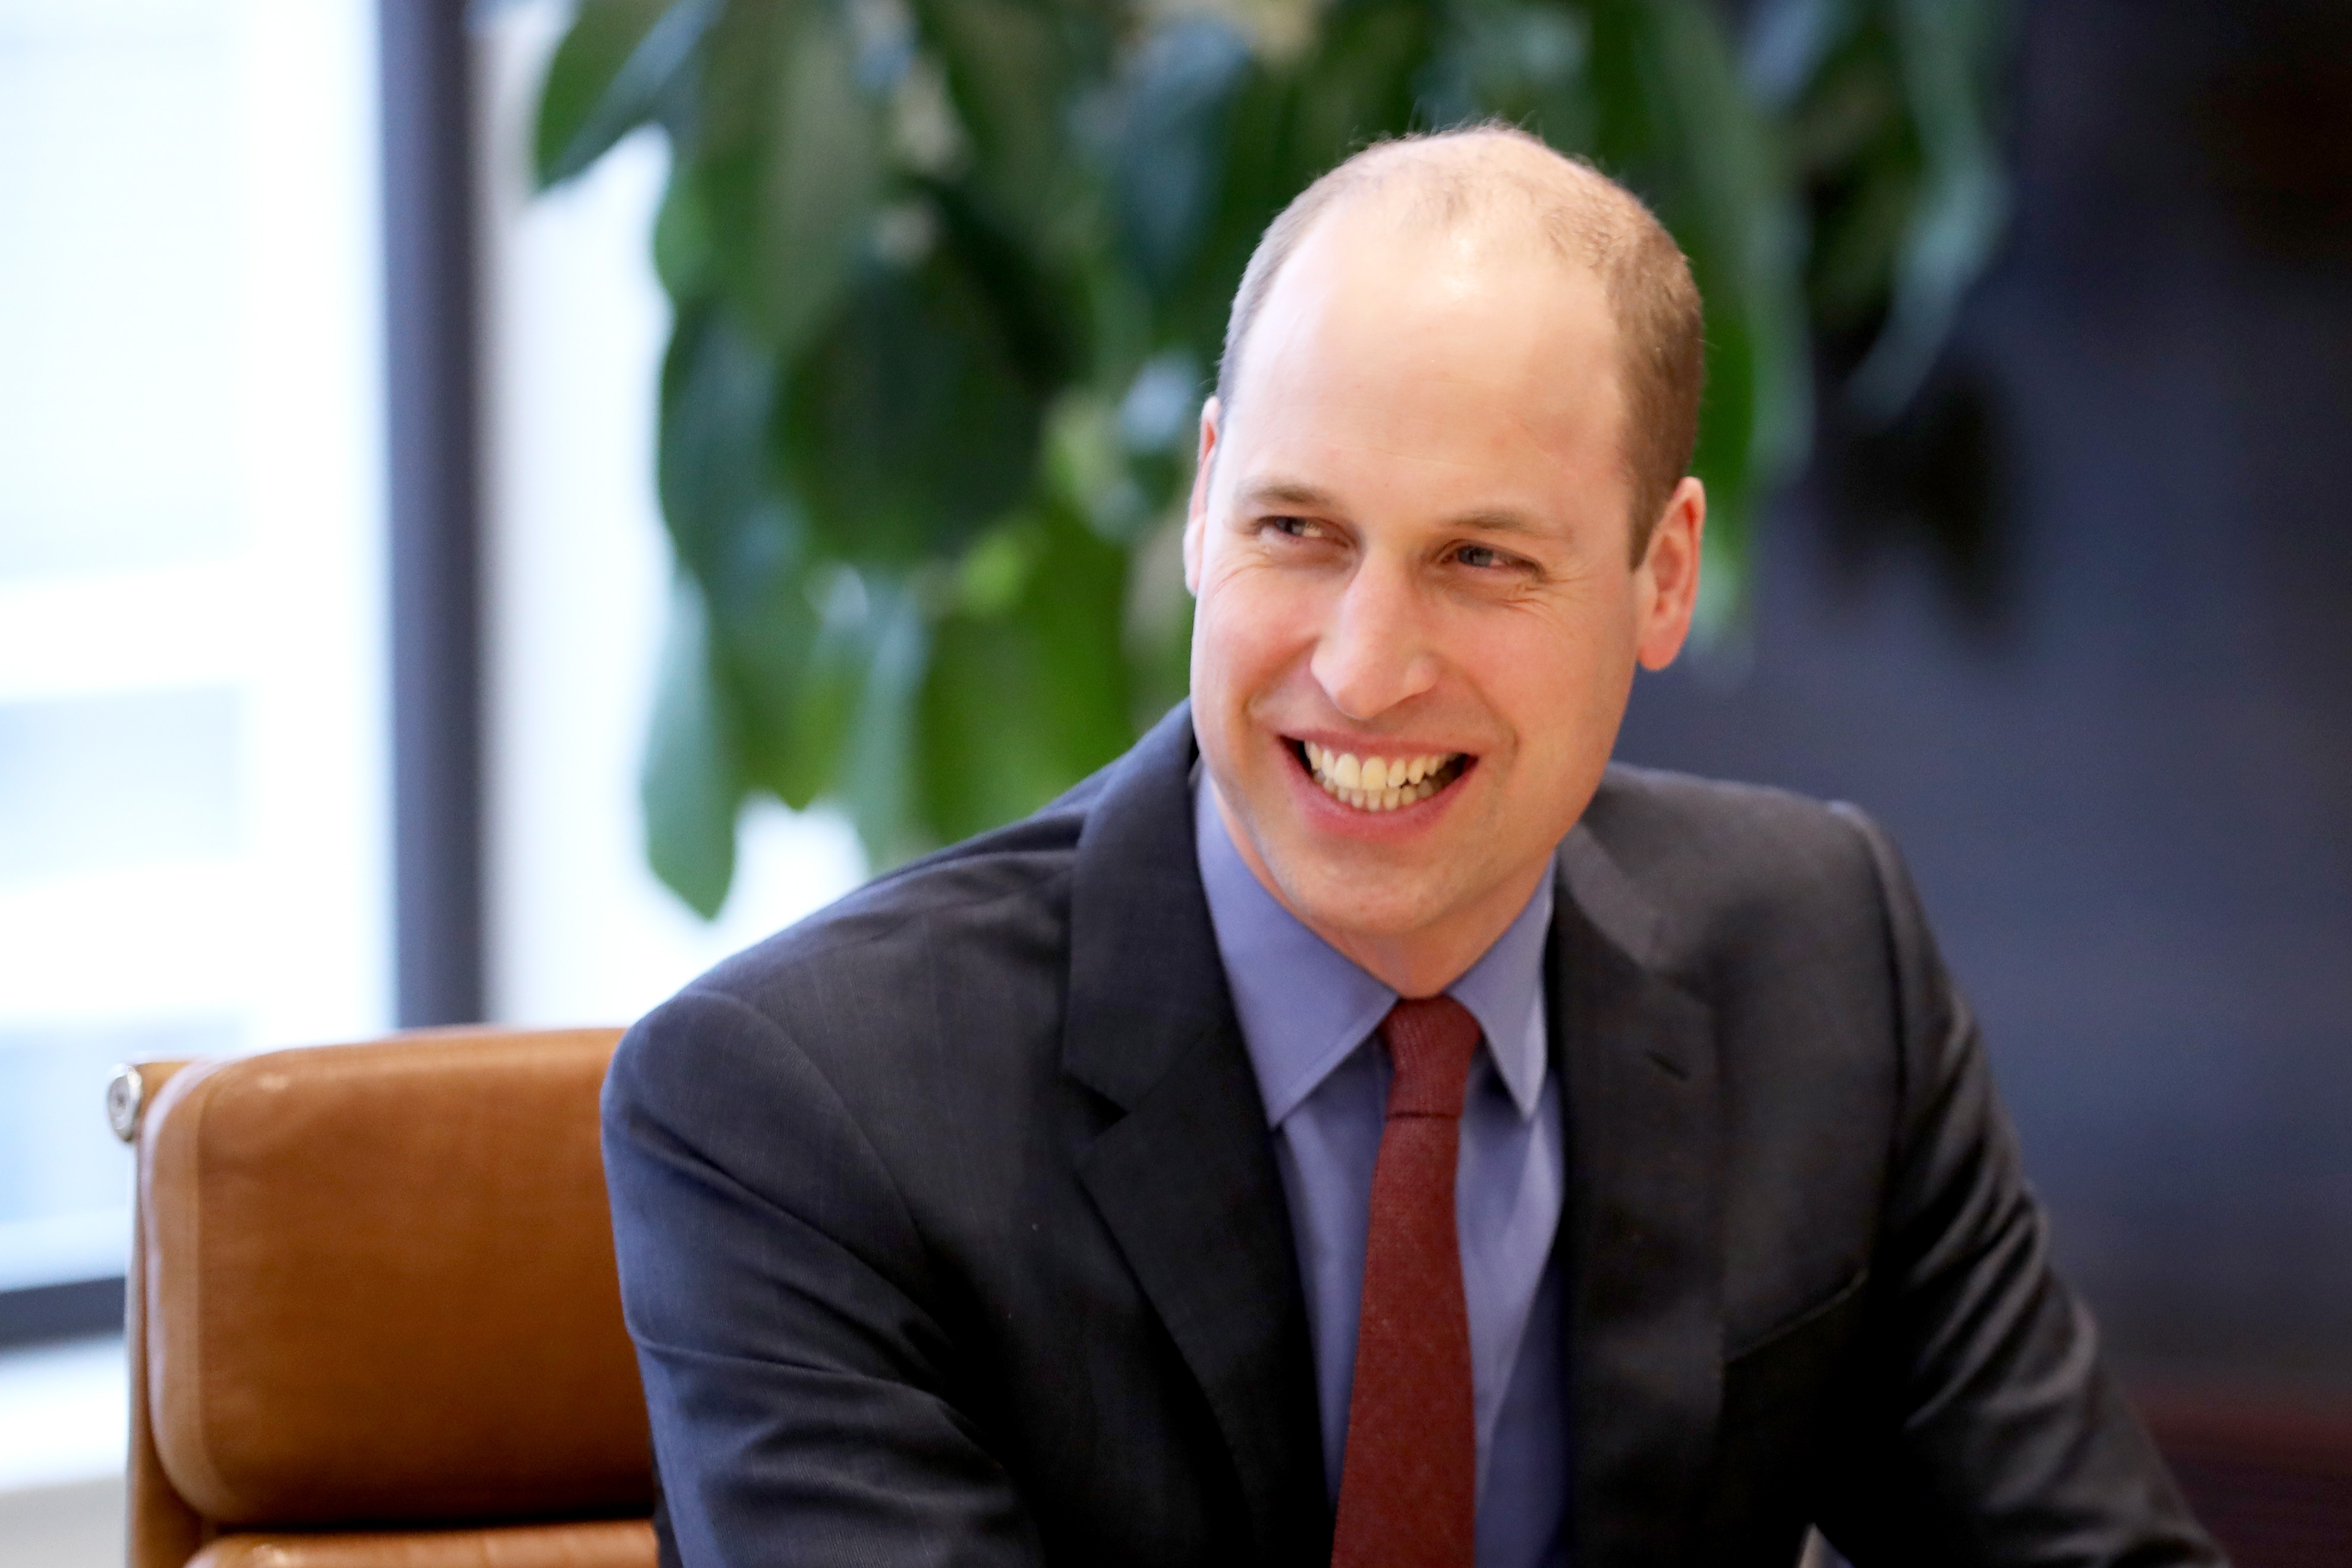 Prince William introduces new workplace mental health initiatives at Unilever House on March 1, 2018 in London, England. (Chris Jackson—h;Getty Images)